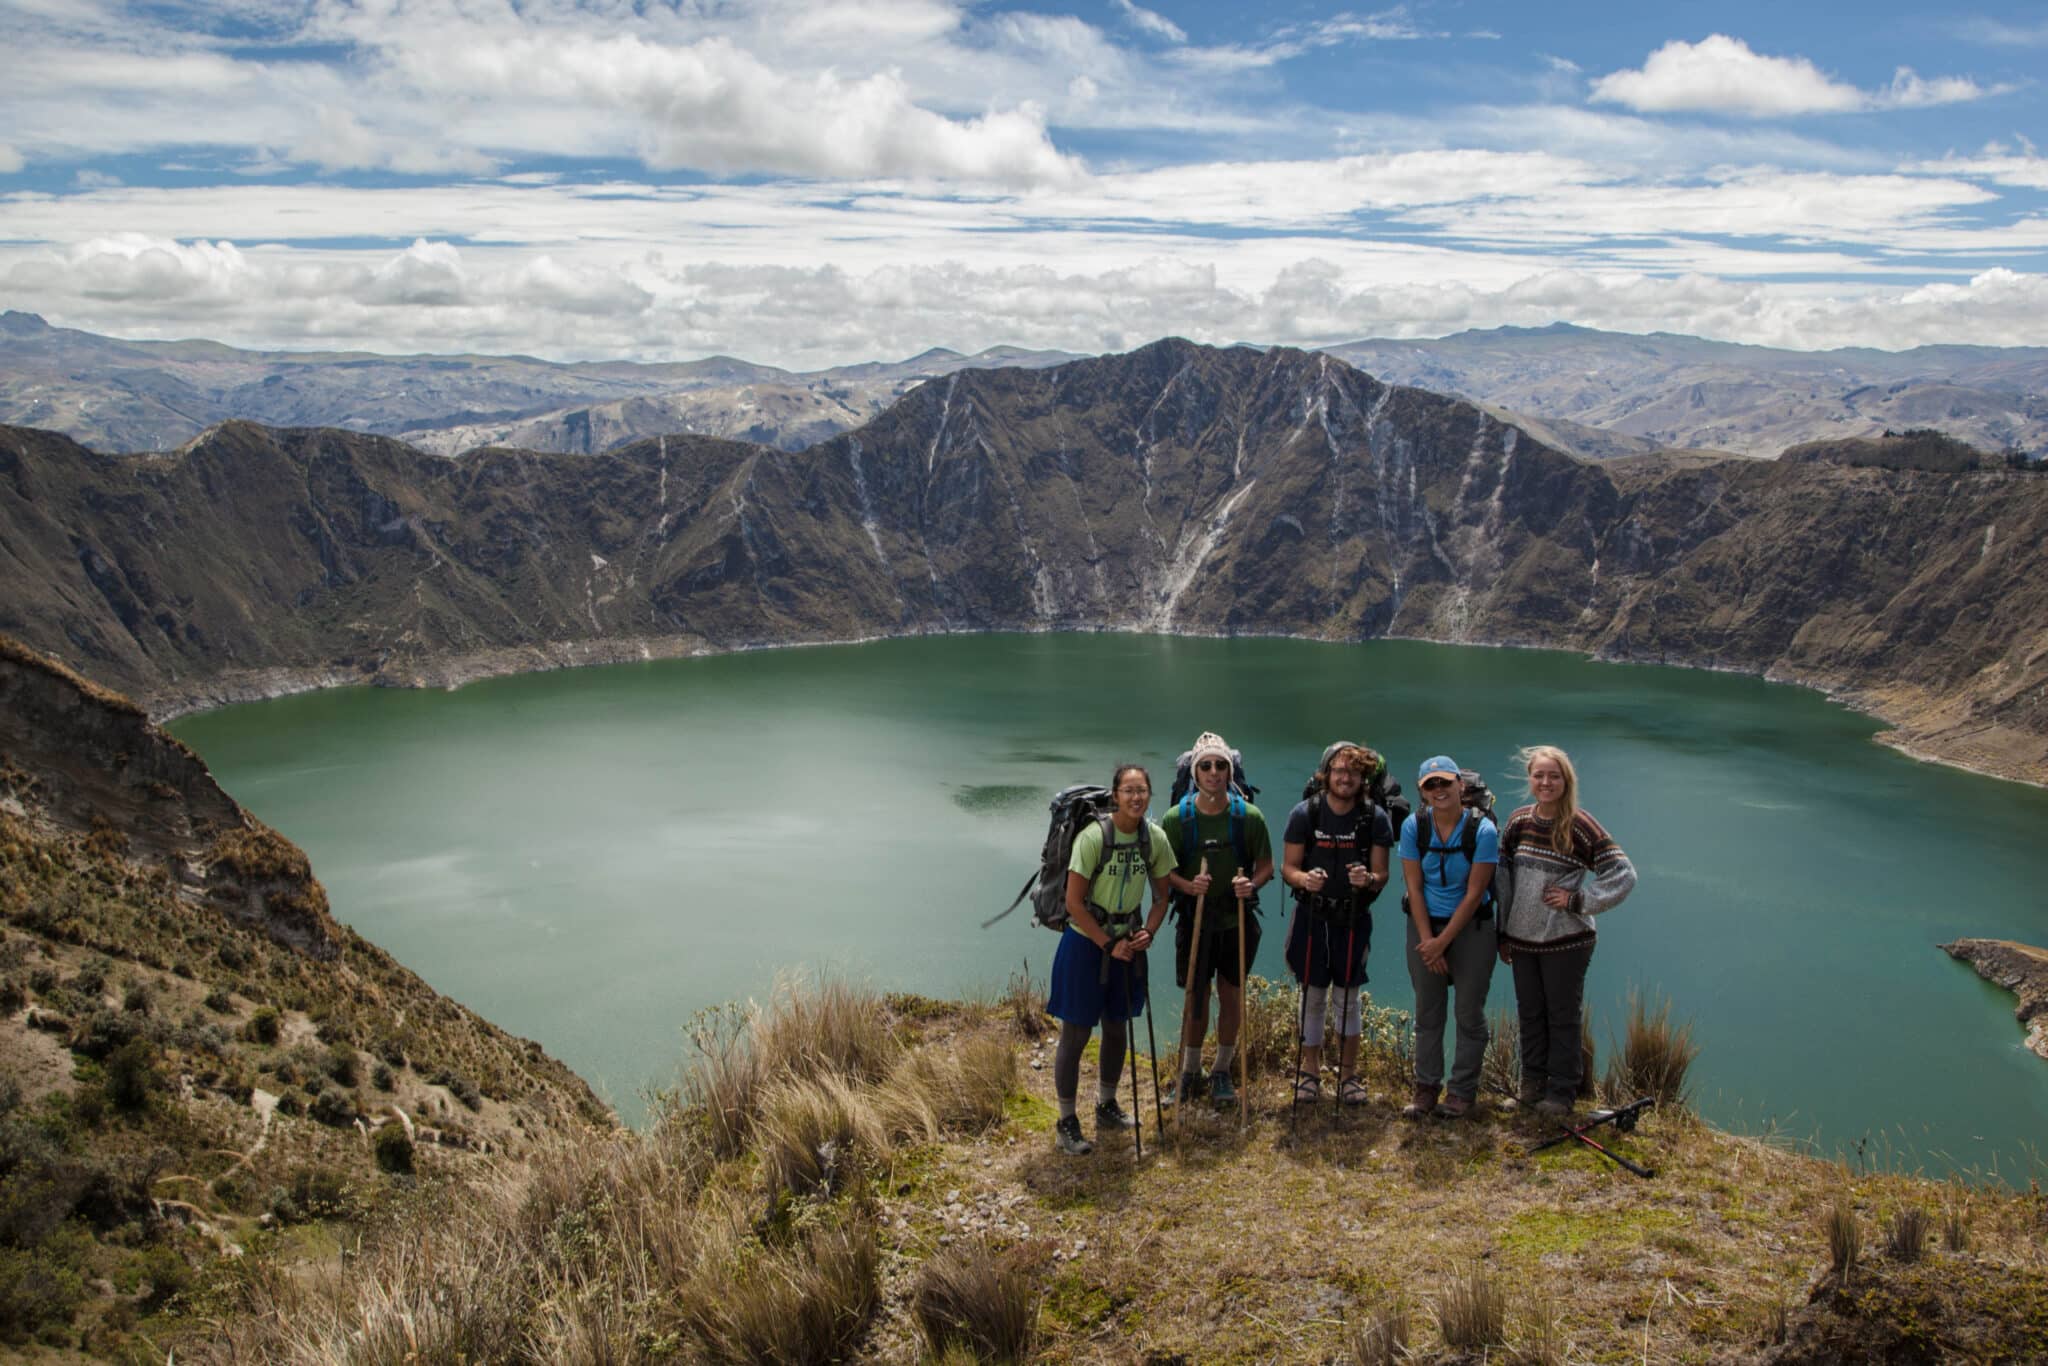 Students backpacking in Ecuador on the Semester Program